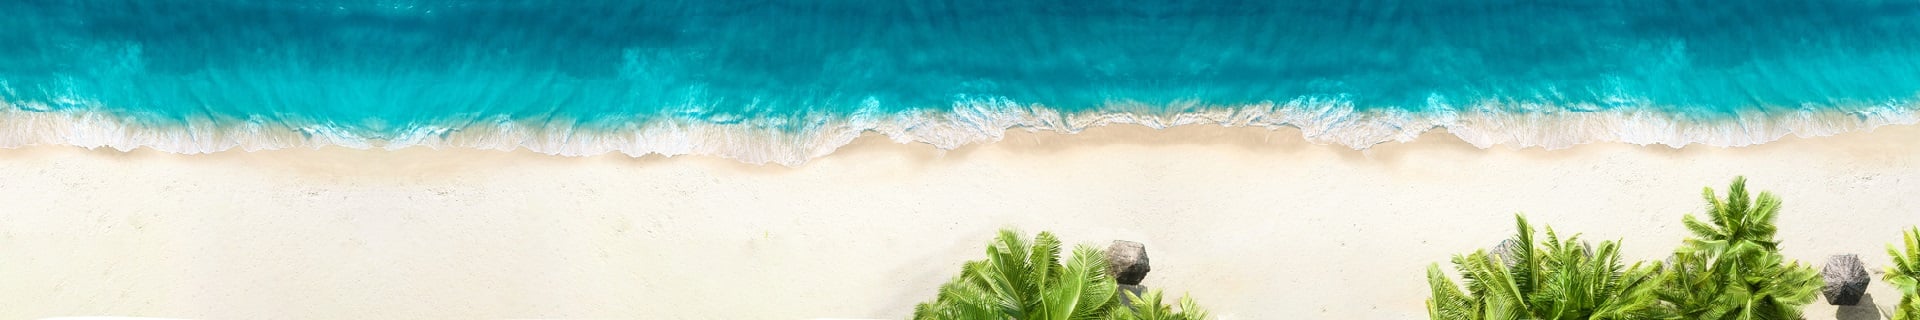 bnr-waves-crashing-on-beach-viewed-from-above-06